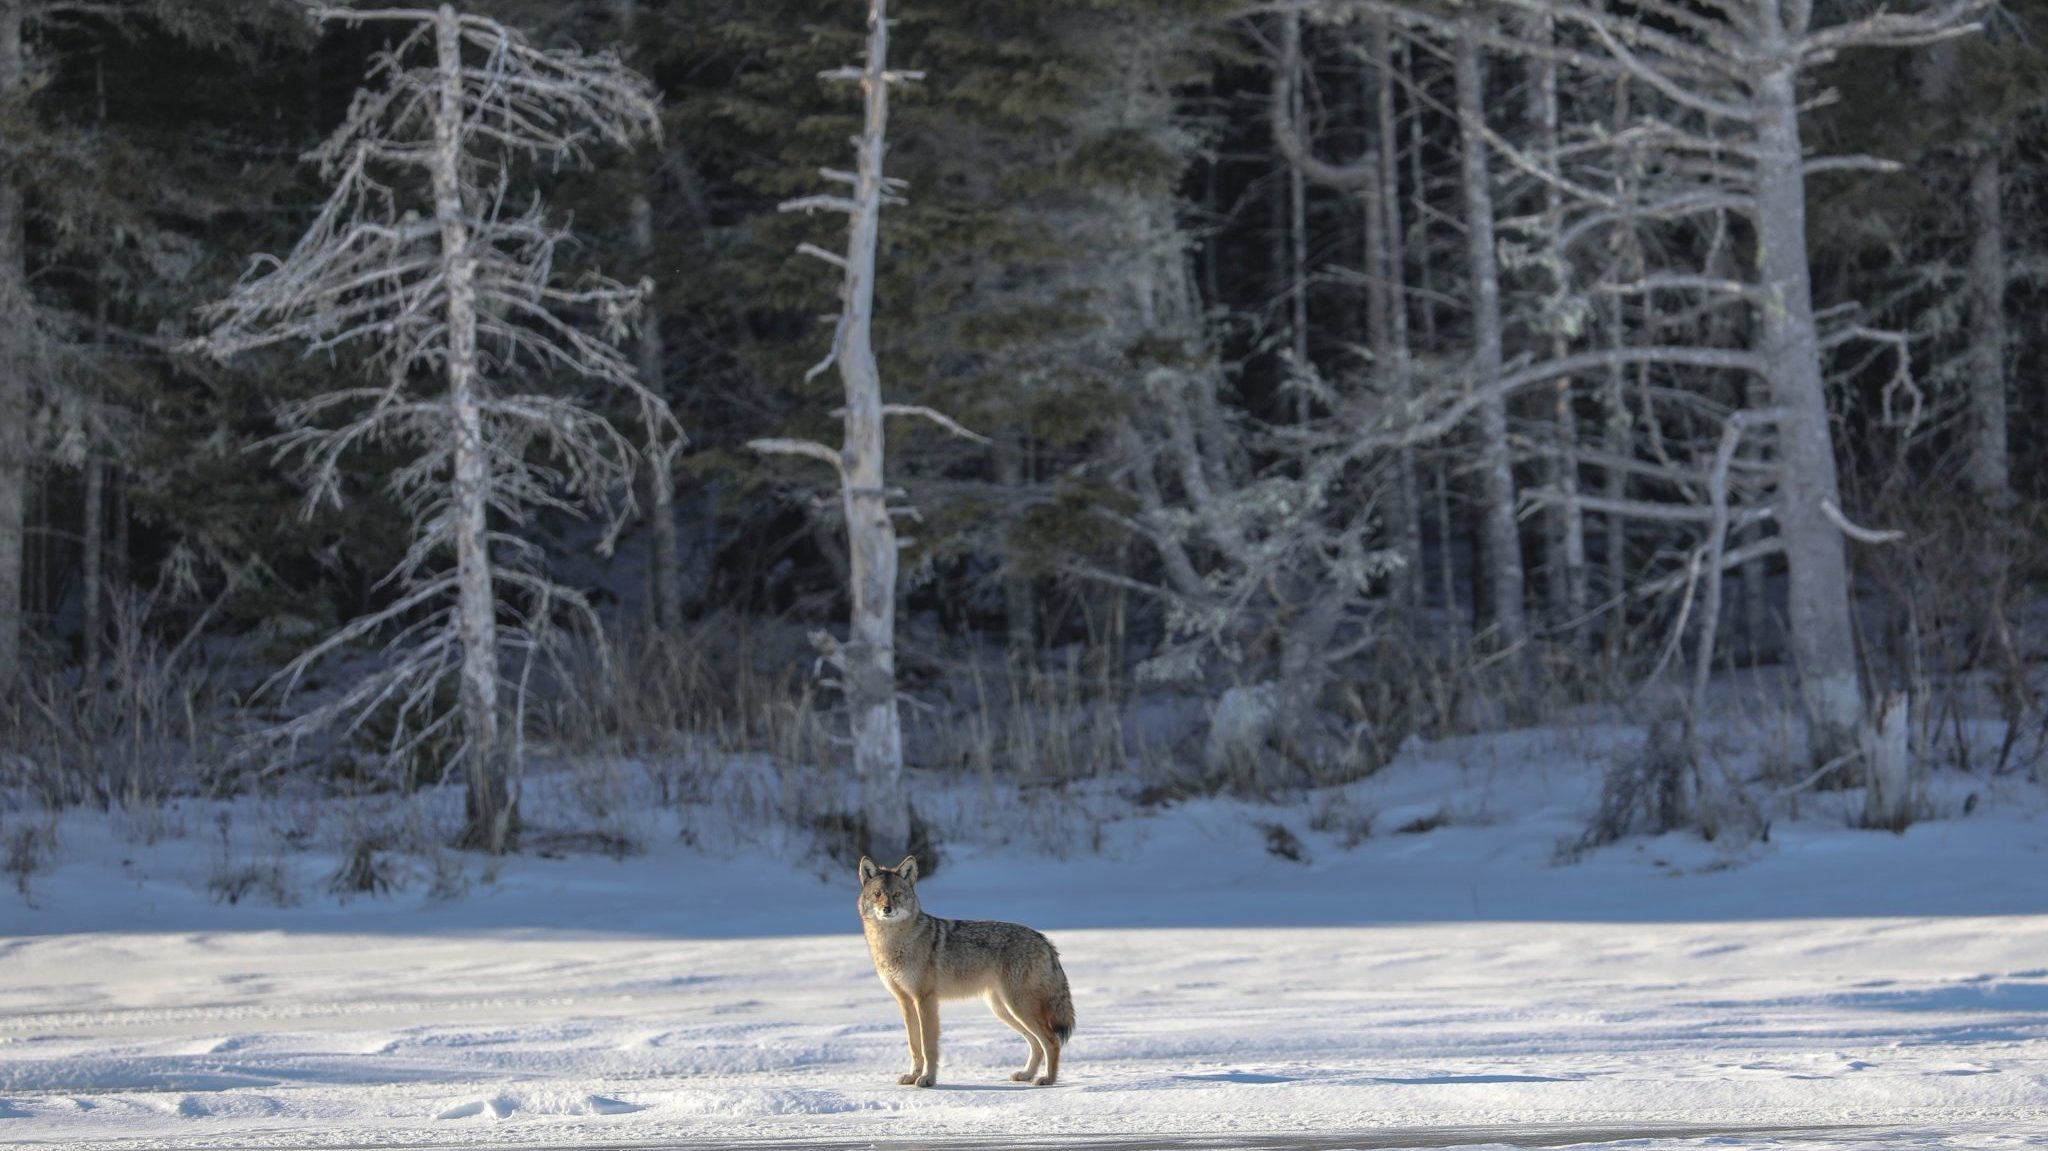 A coyote on the edge of the forest, in winter.